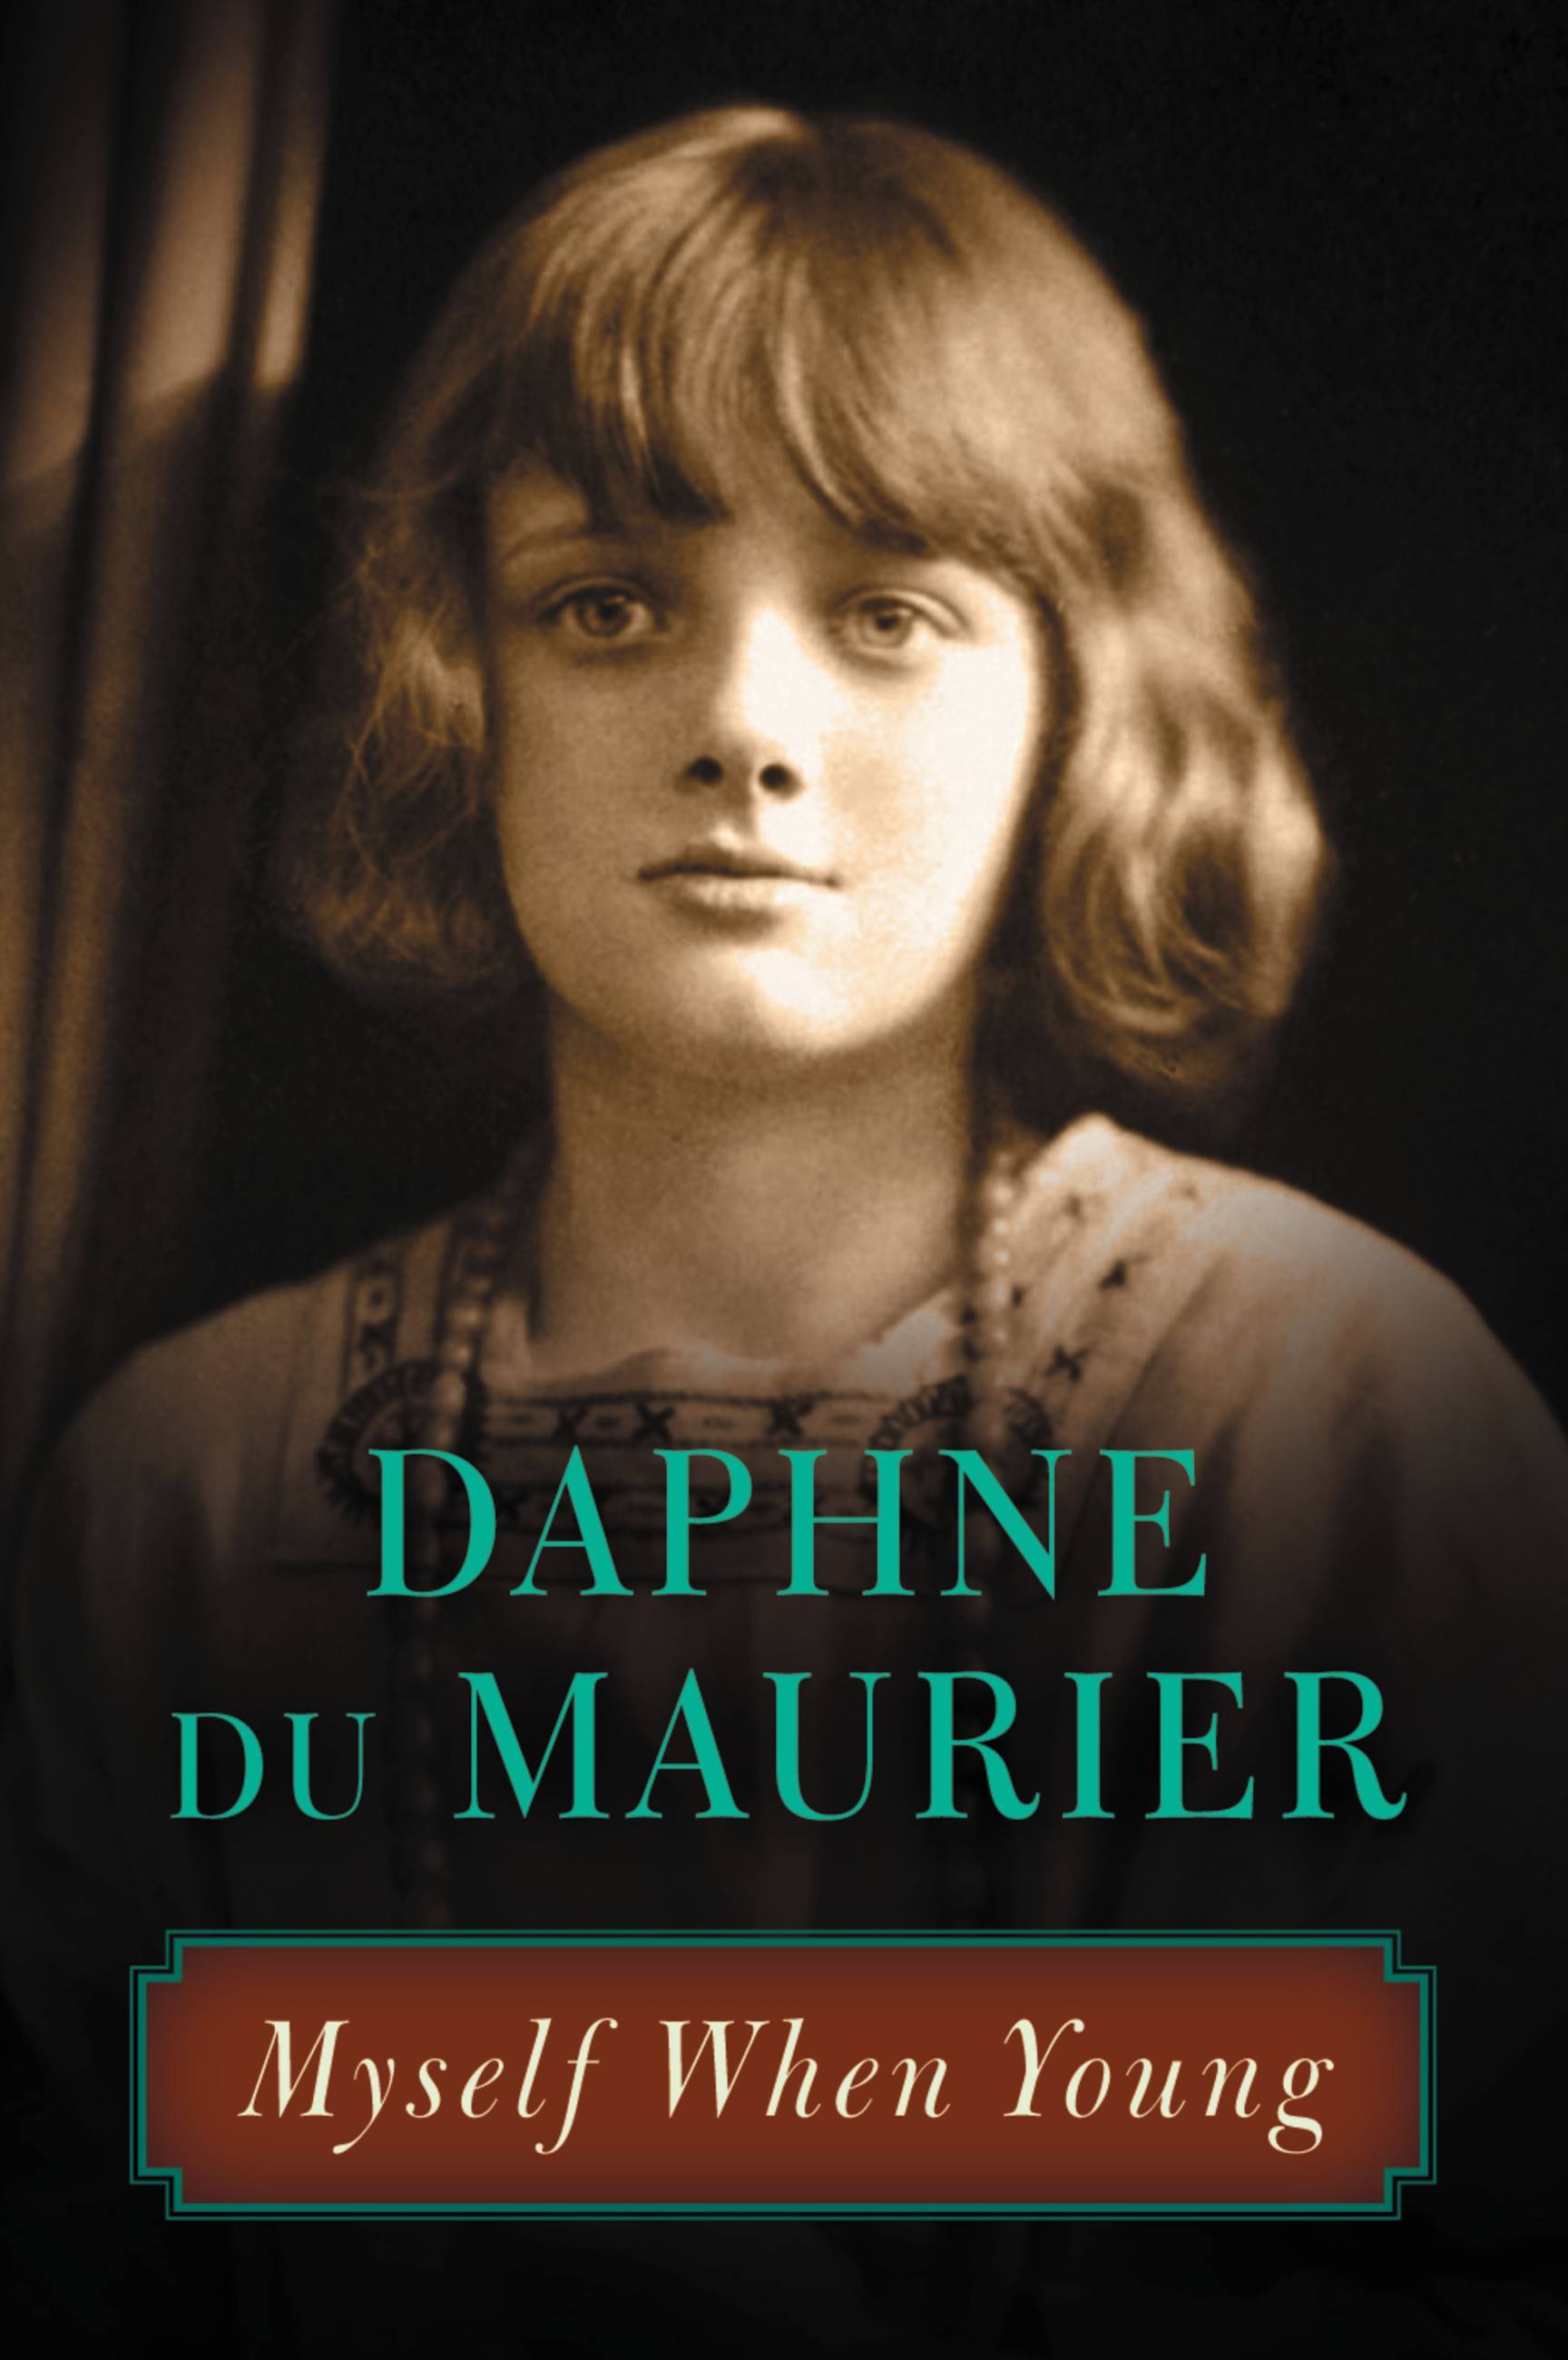 Myself When Young By Daphne Du Maurier Hachette Book Group